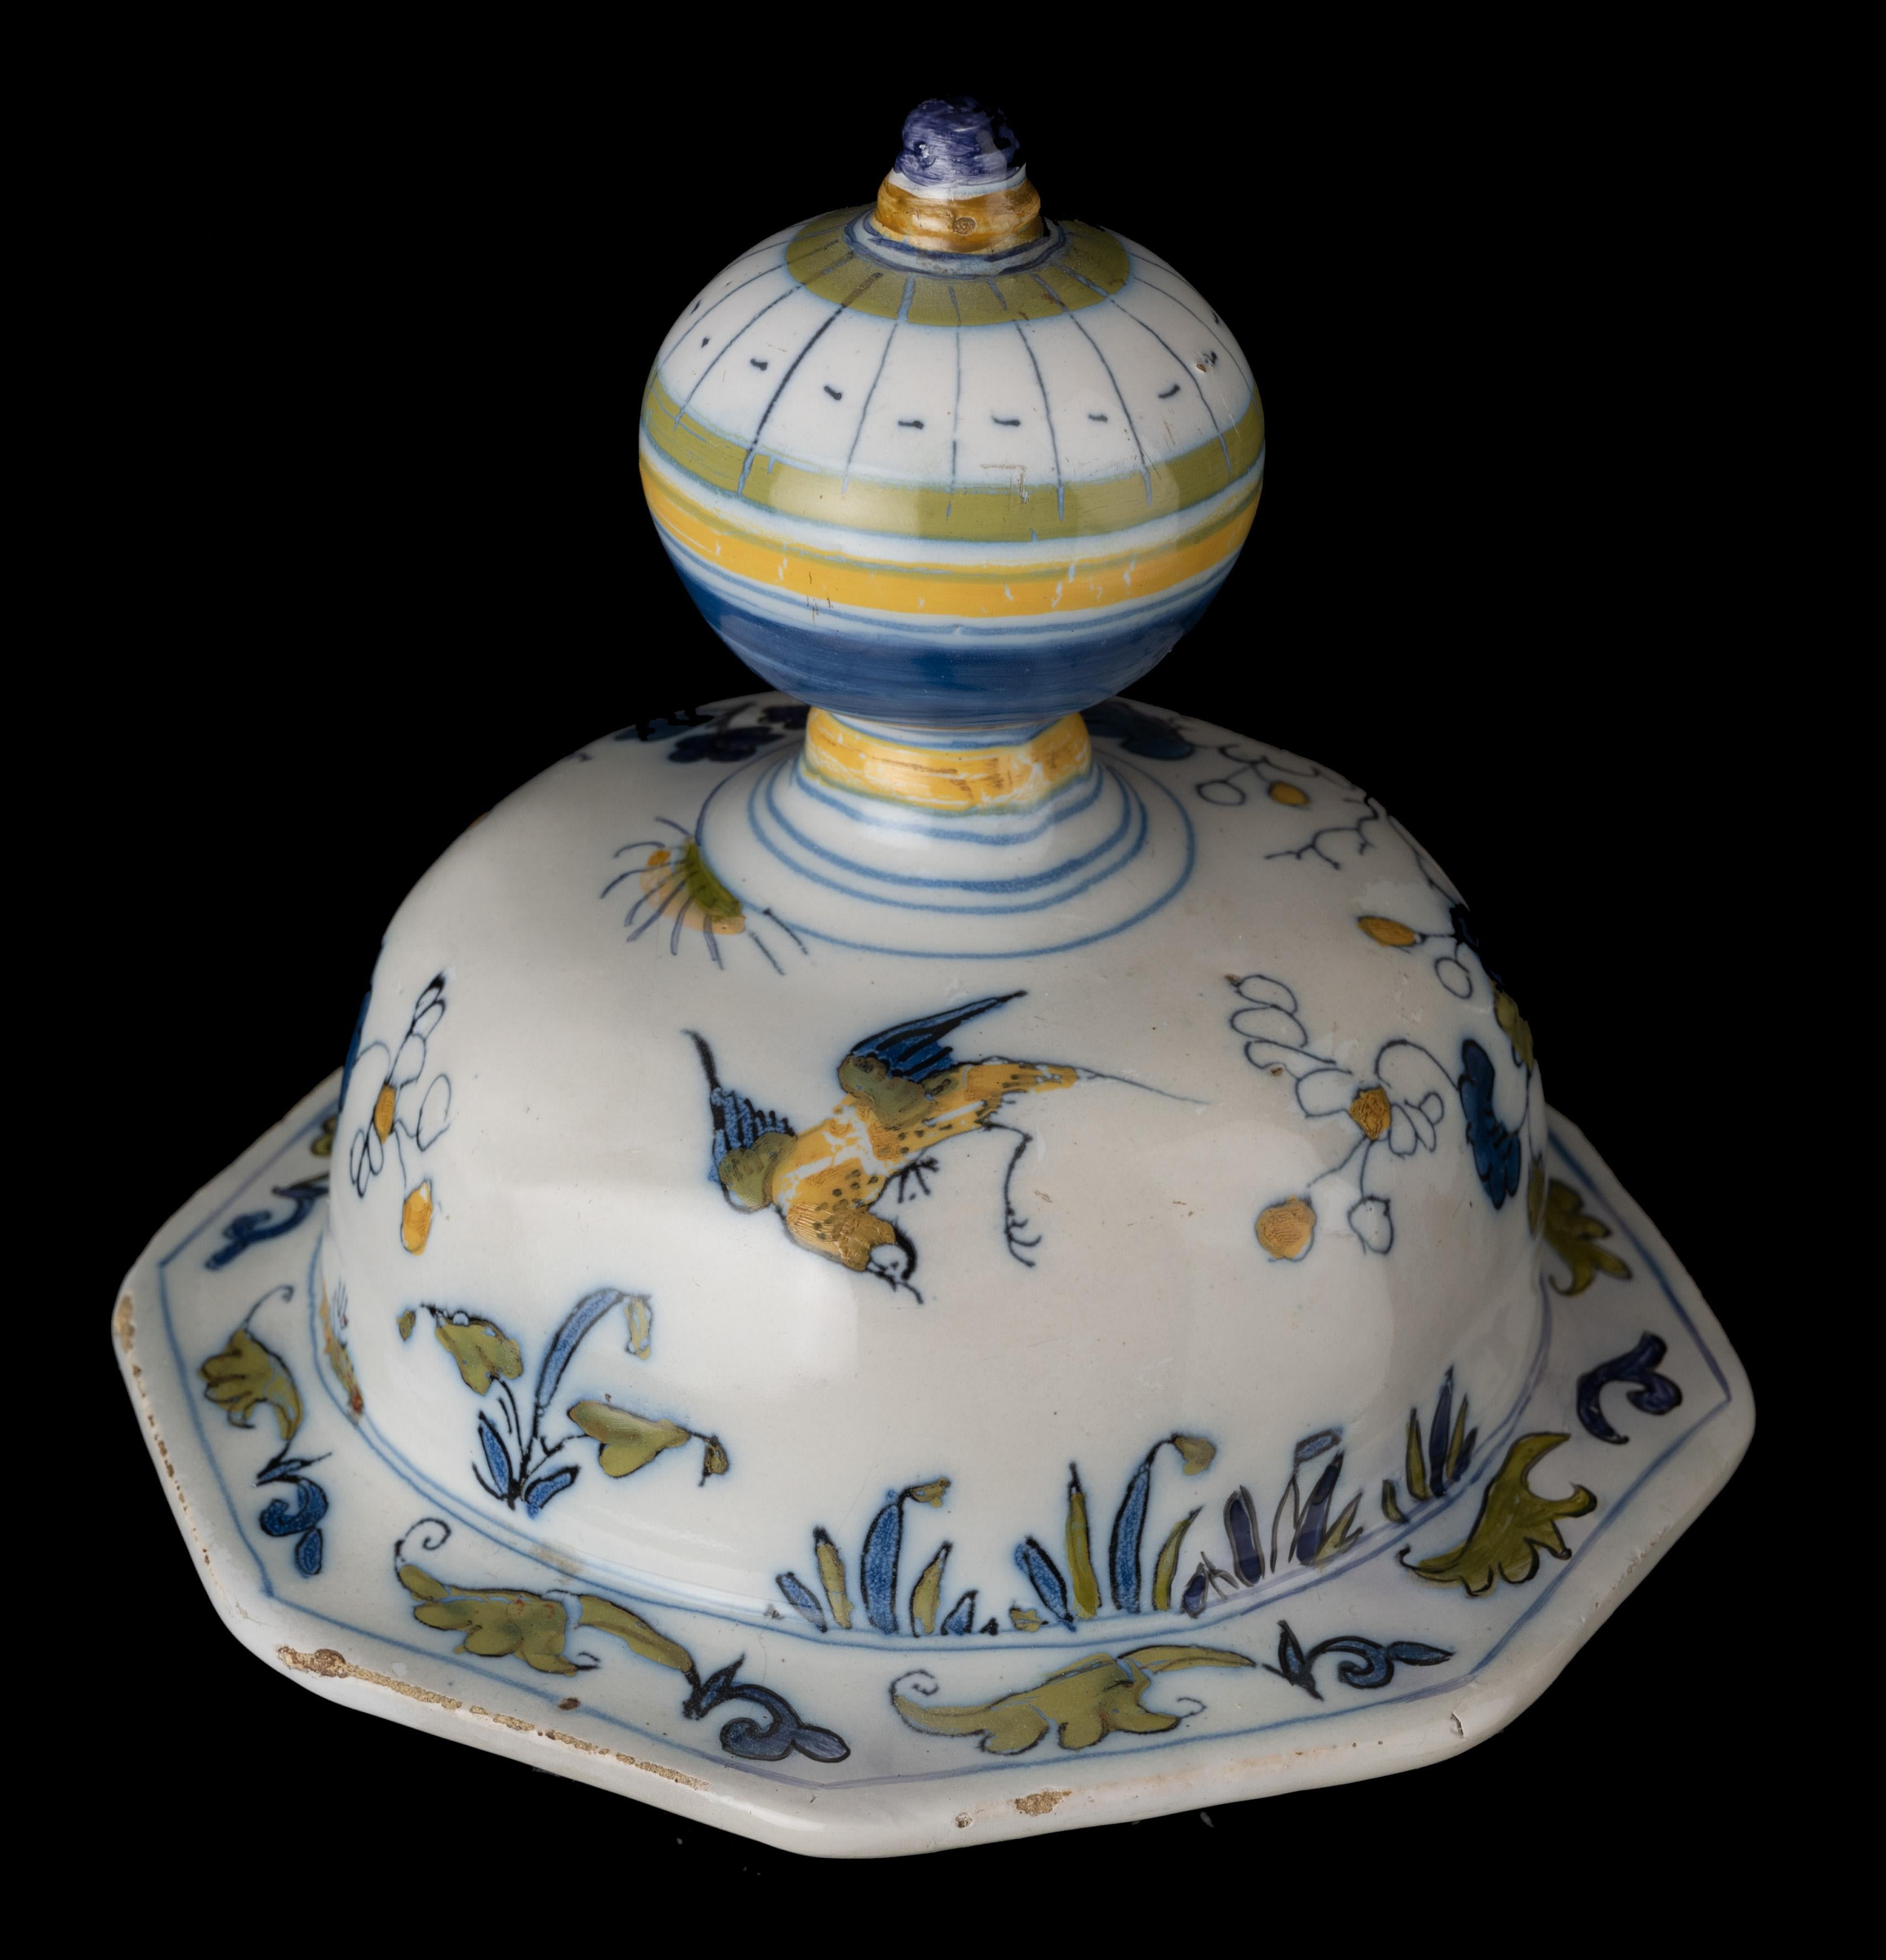 Delft Polychrome Covered Jar with Peacock and Dragon in Landscape, 1690-1700 For Sale 5